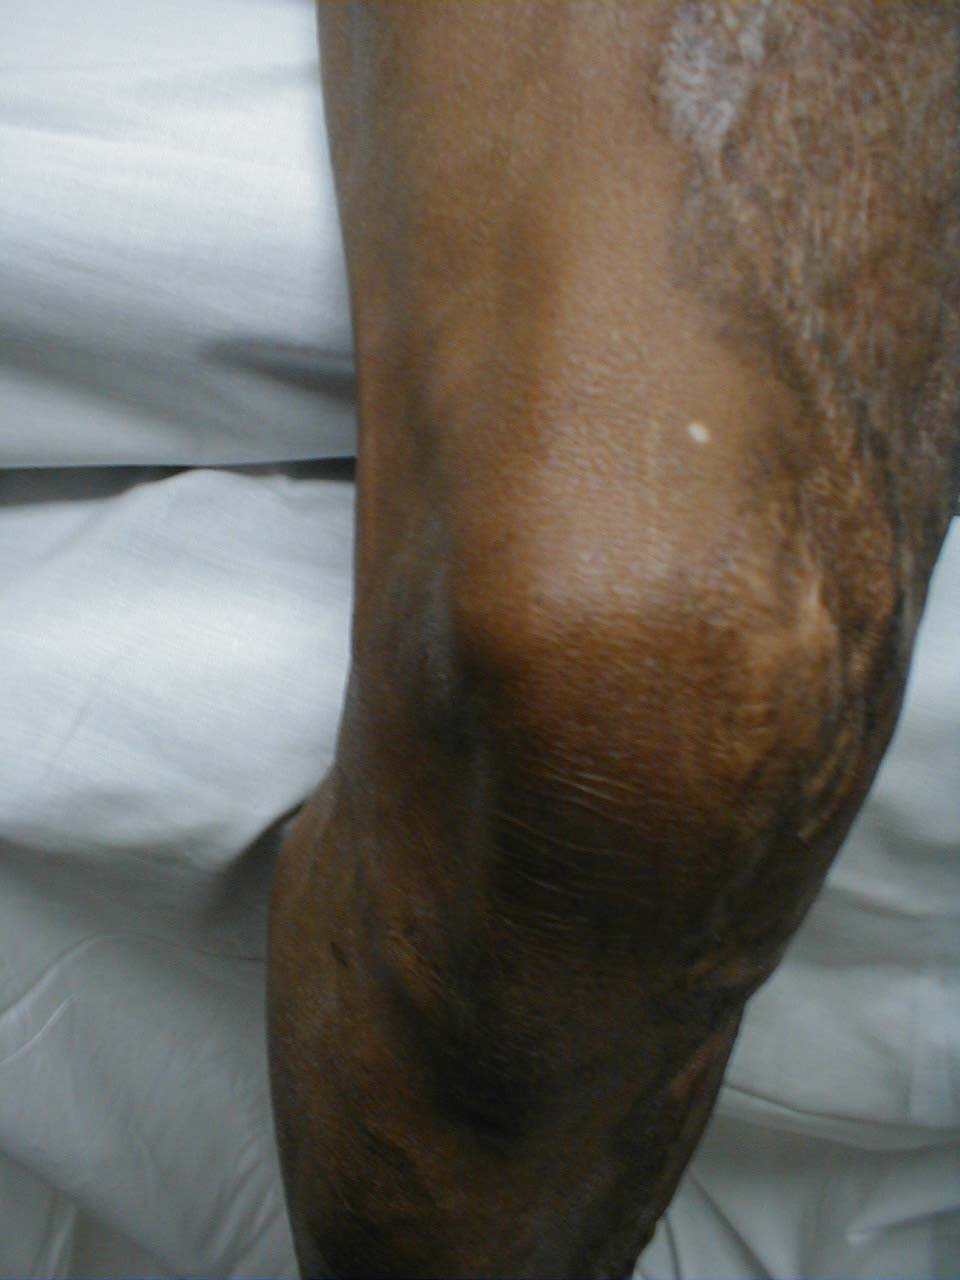 Gout of the Knee: Image demonstrates redness and swelling caused by acute gouty arthritis.